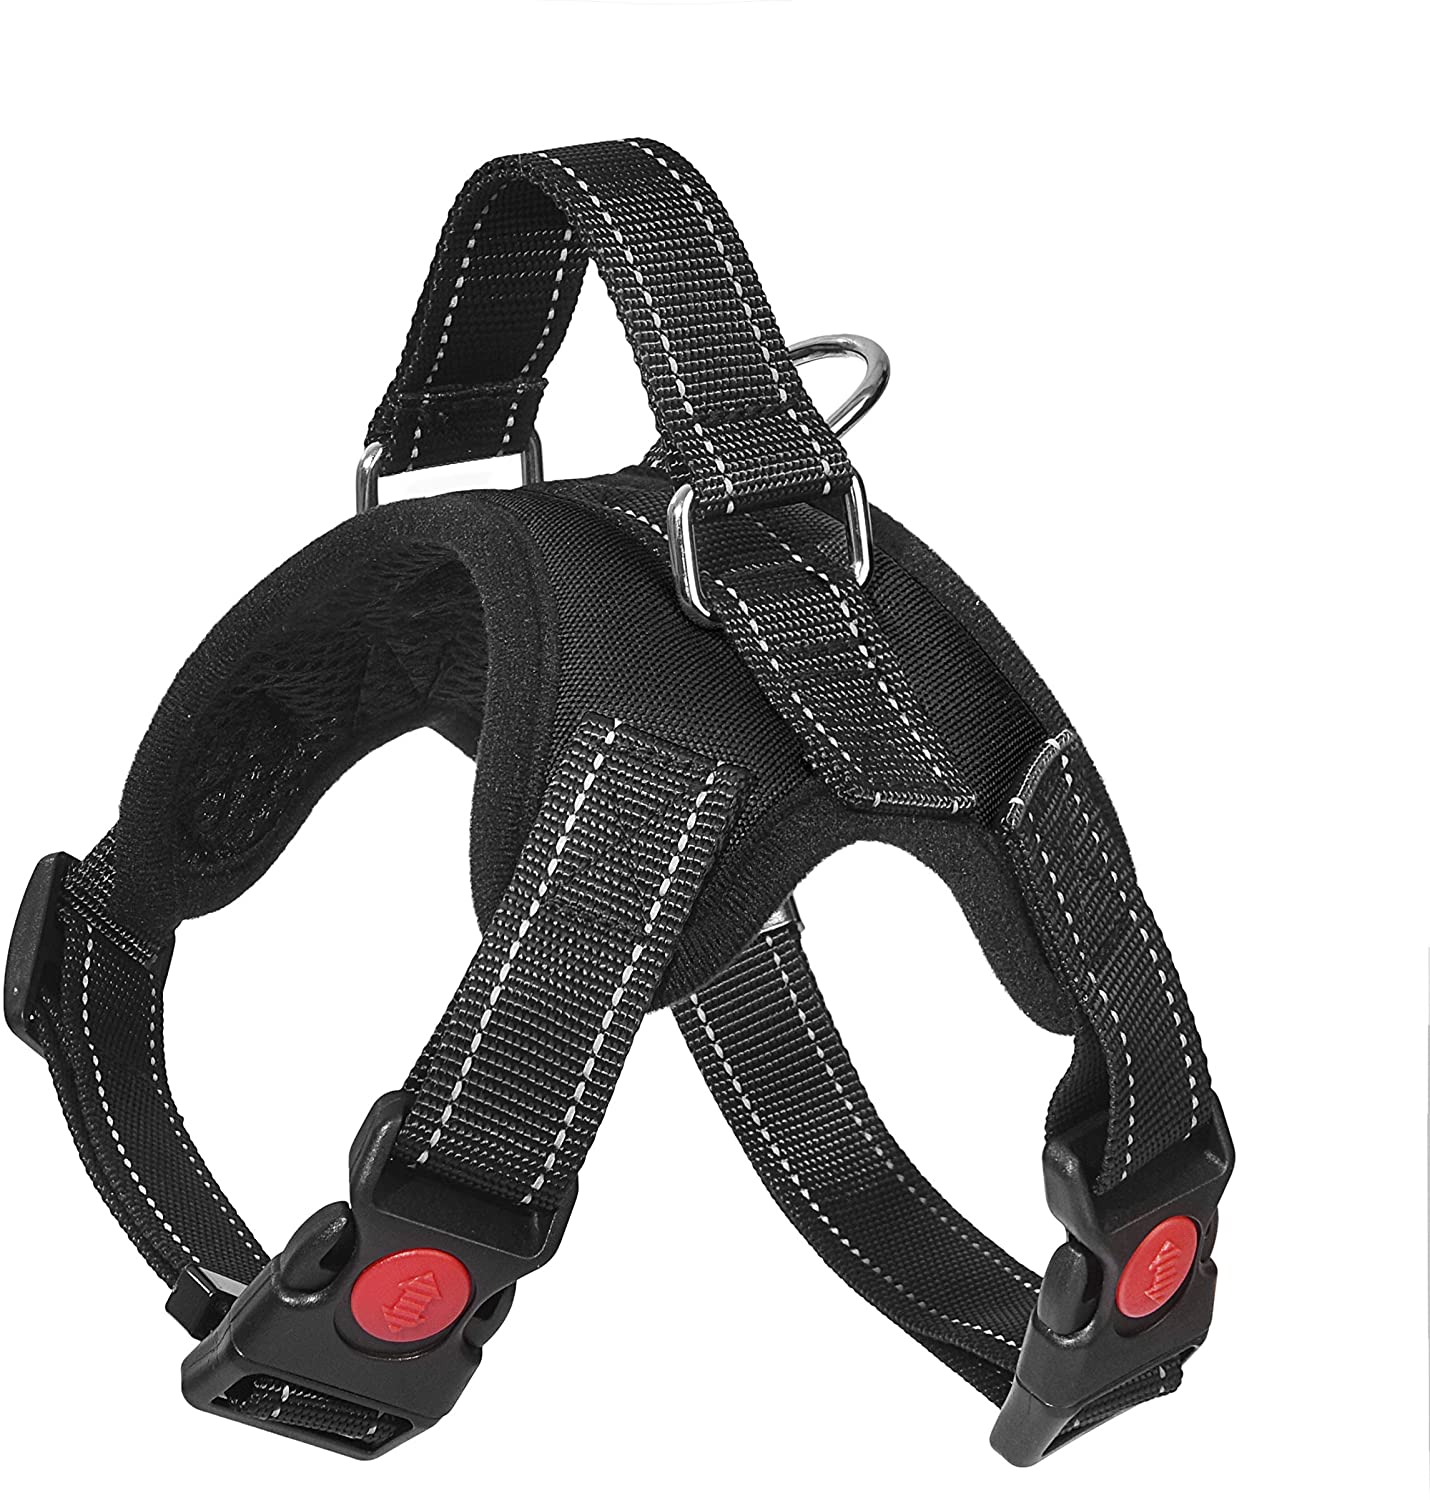 Dog Harness, Breathable Adjustable Dog Vest Pet Harness for Small Medium Large Dogs with Sturdy Leash (XS, Black) - e4cents